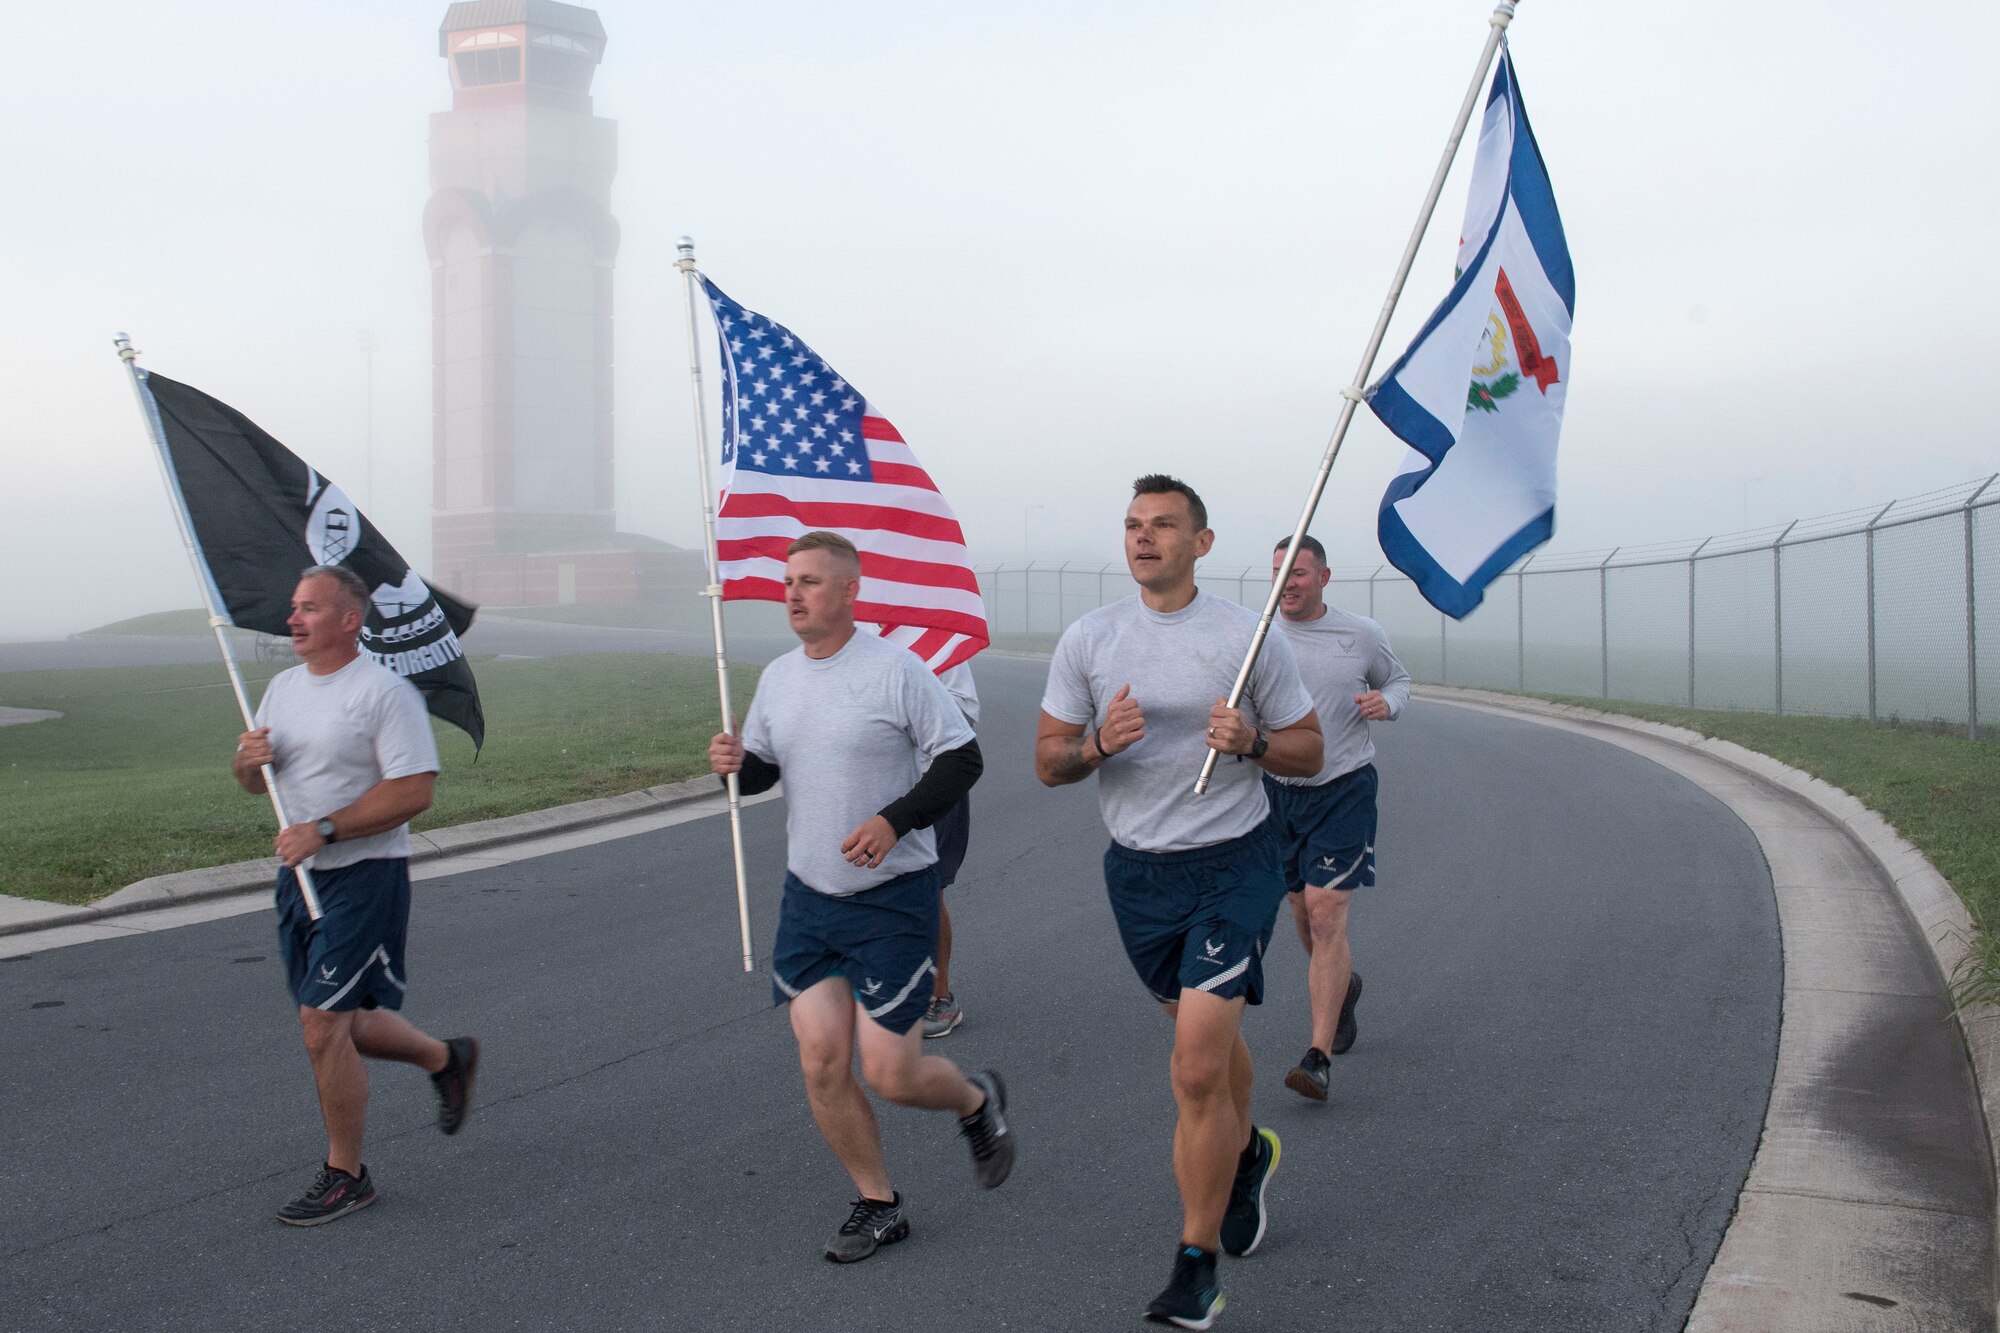 Members of the 167th Civil Engineering Squadron participate in the POW/MIA 12 Hour Remembrance Run/Walk held at the 167th Airlift Wing, Martinsburg, West Virginia, Oct. 2, 2021. Unit members carried the U.S., POW/MIA and West Virginia flag for the duration of the event, starting at 6:00 a.m. and ending at 6:00 p.m., to pay tribute to those who were prisoners of war and those still missing in action.